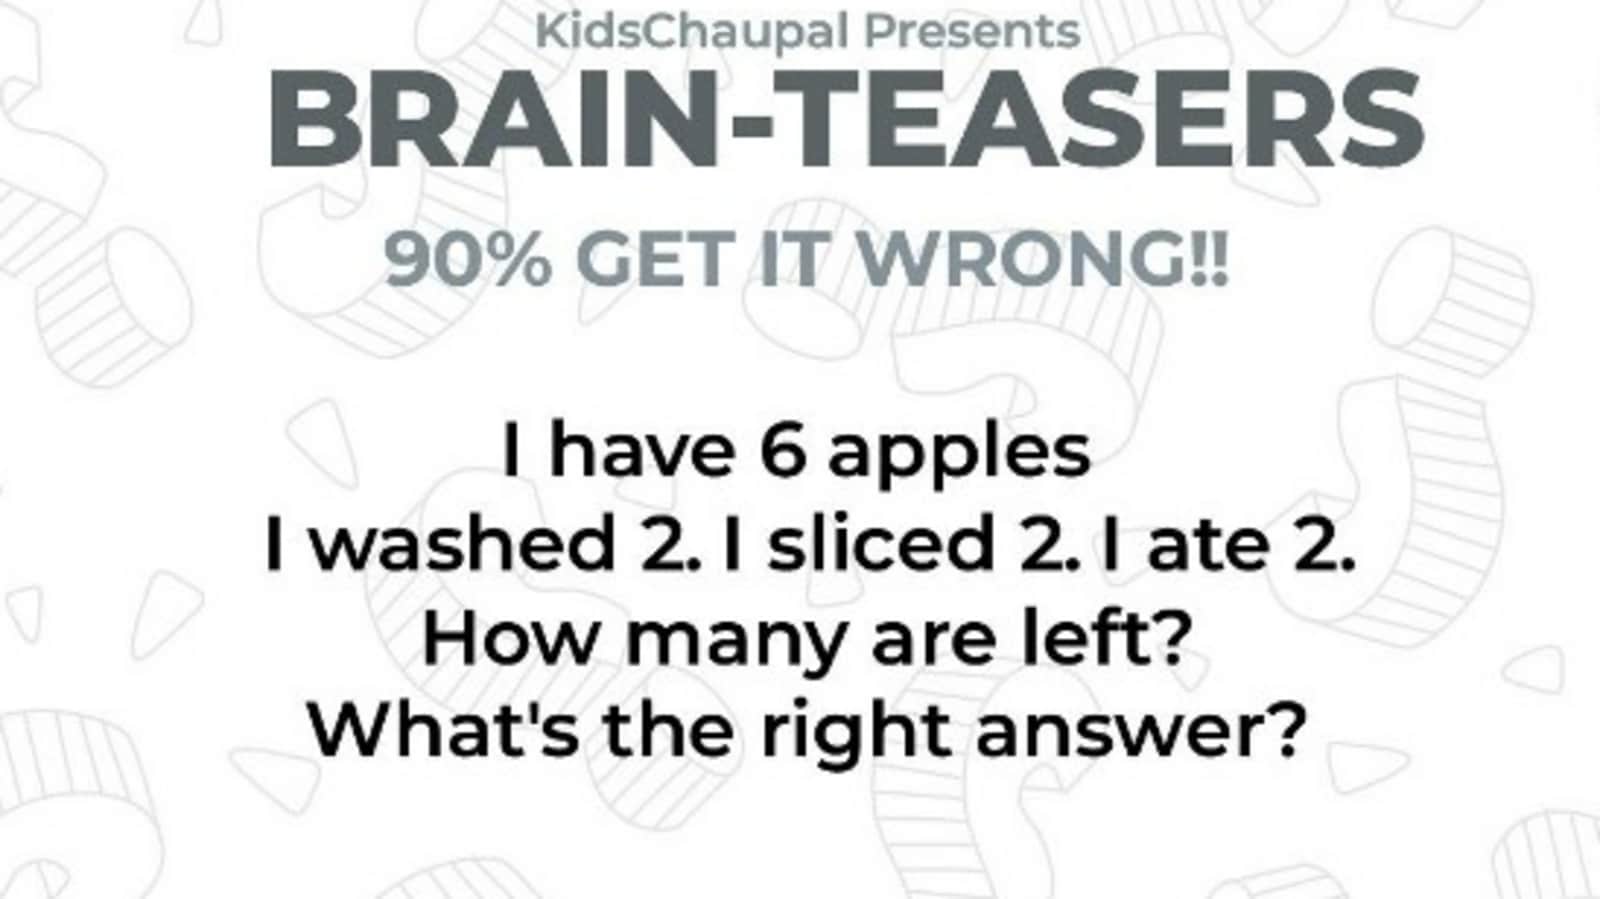 '90% get it wrong': Will you be able to solve this perplexing brain teaser?